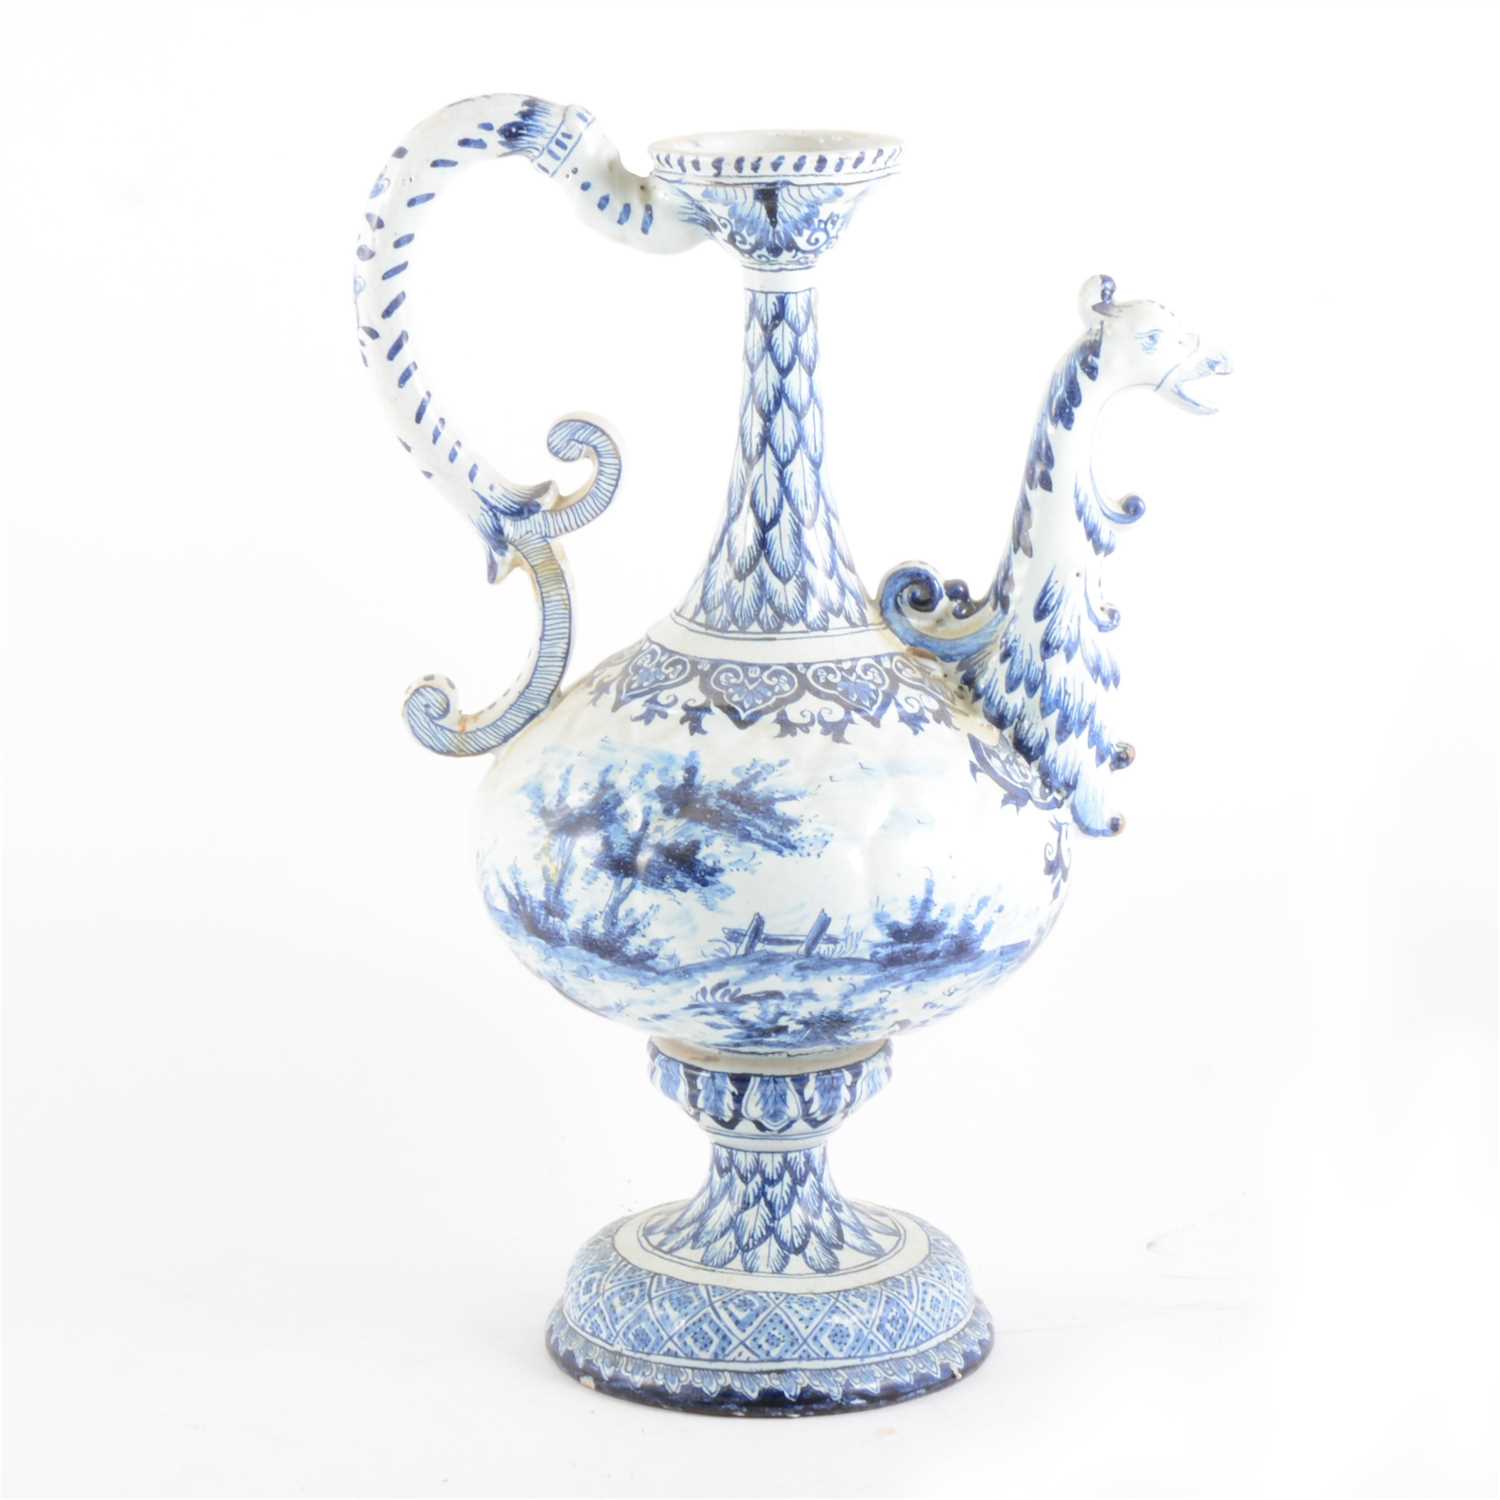 Lot 44 - A Dutch Delft blue and white ewer, griffin head handle